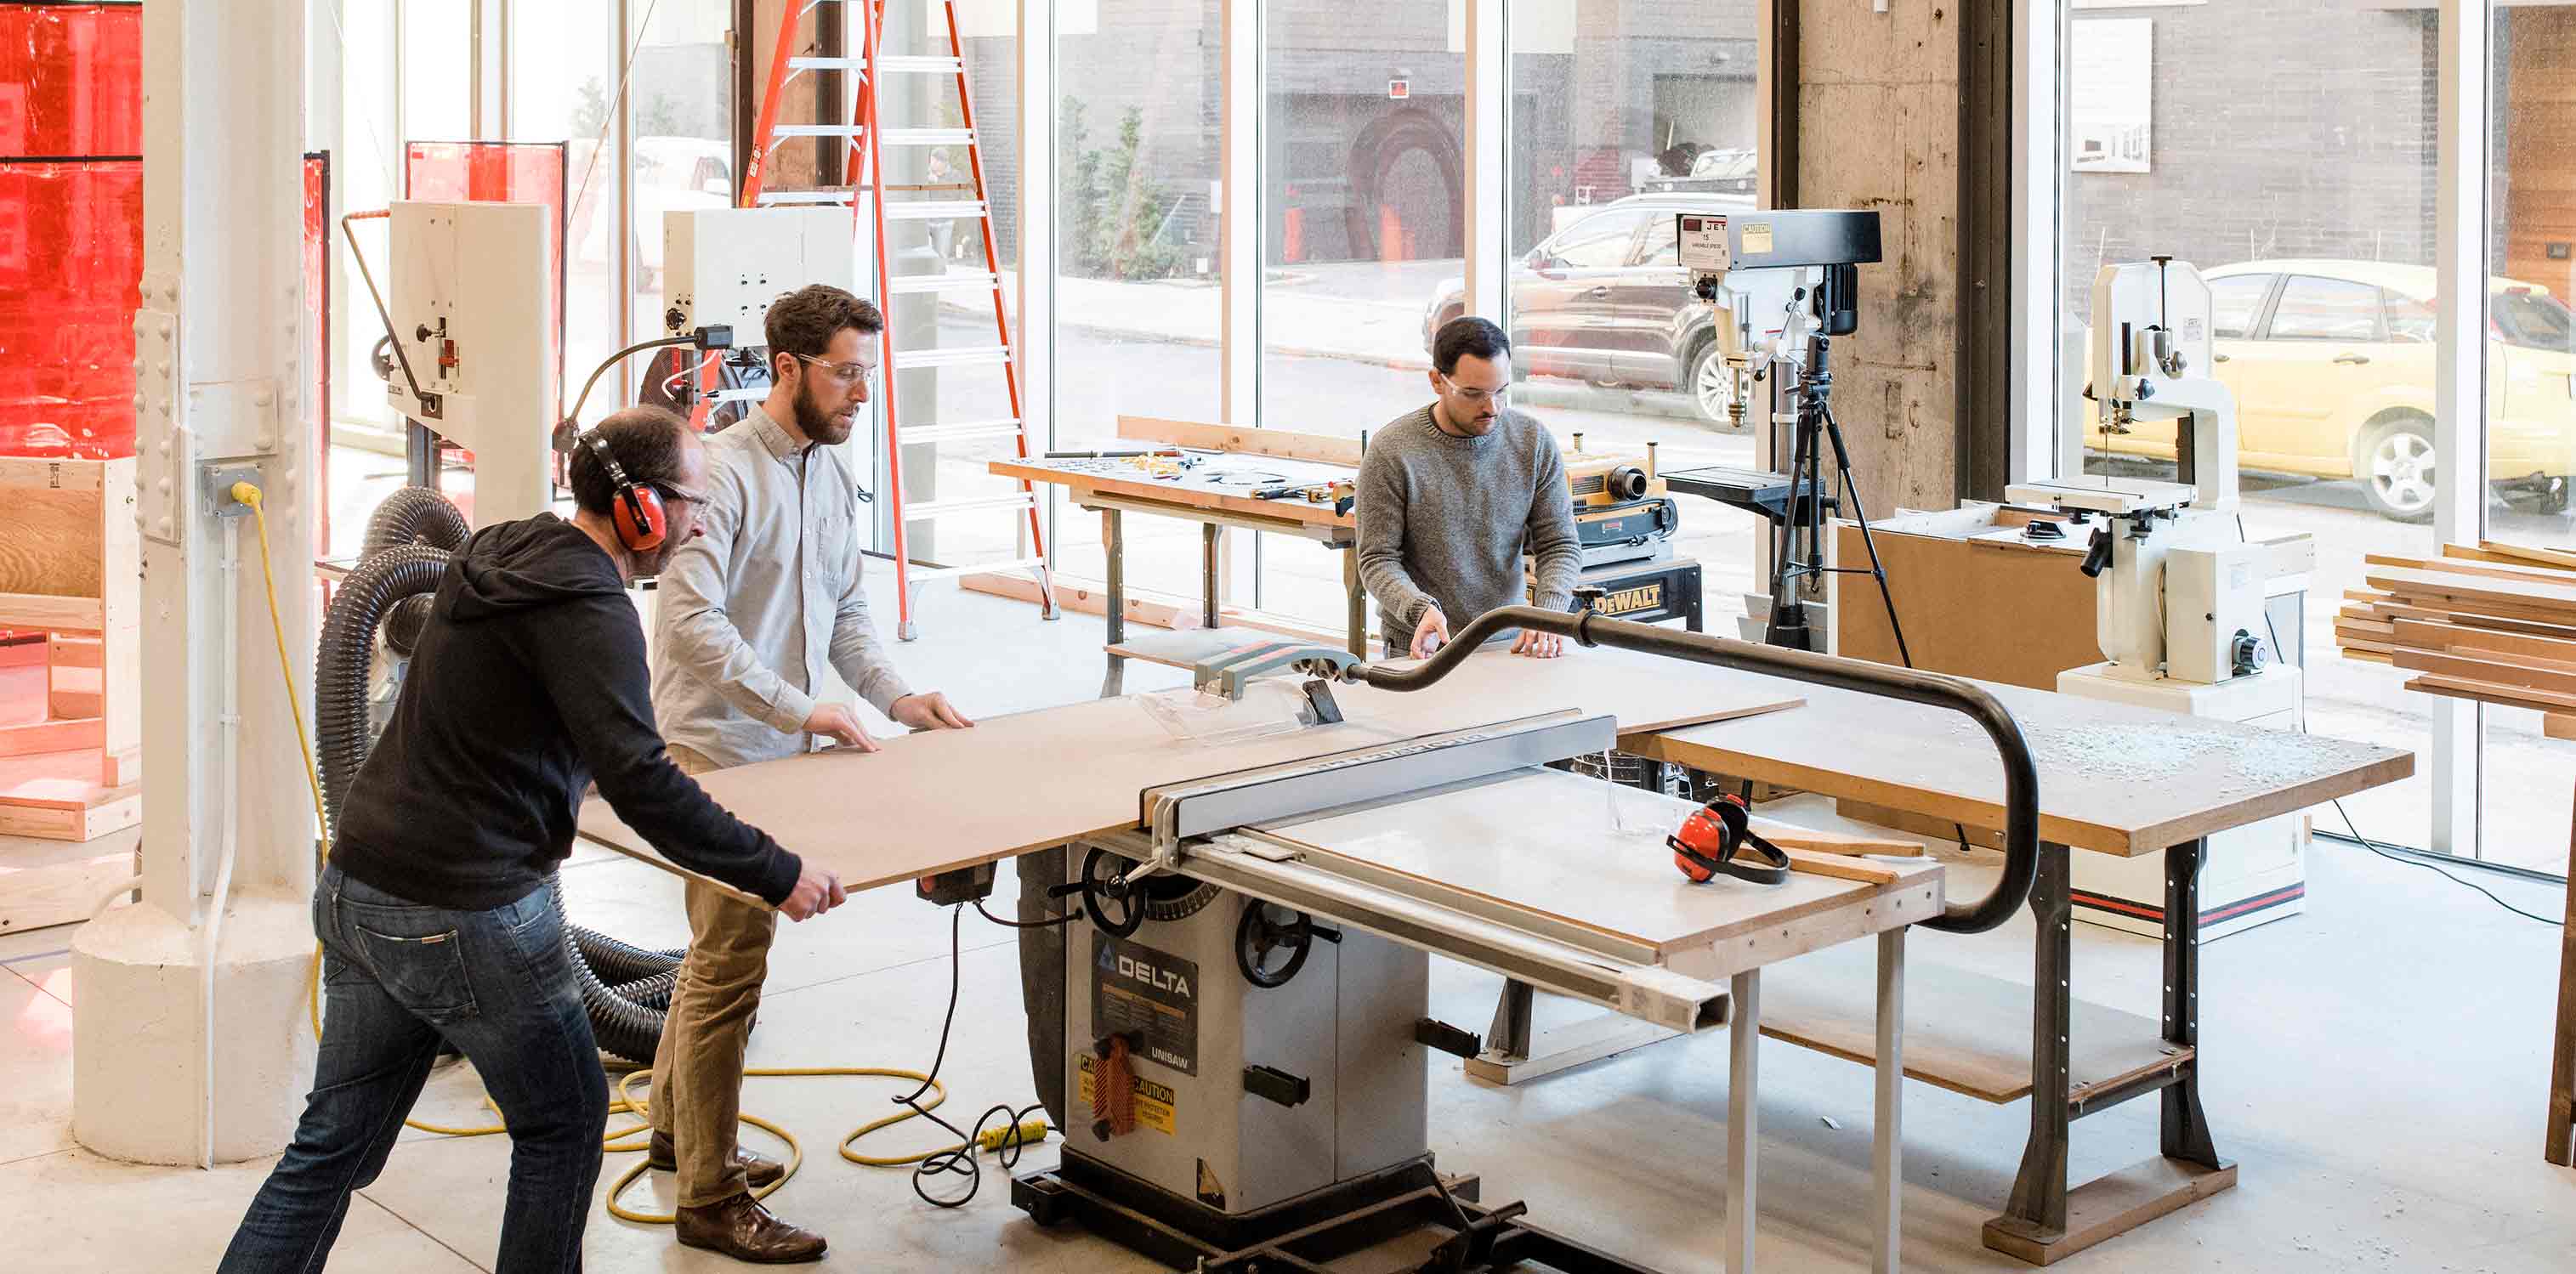 <p>Researchers and architects work side by side, often in the studio's workshop as they create full-scale prototypes and simulations.<br>&nbsp;<br /><small>&copy;Chris Leaman</small></p>